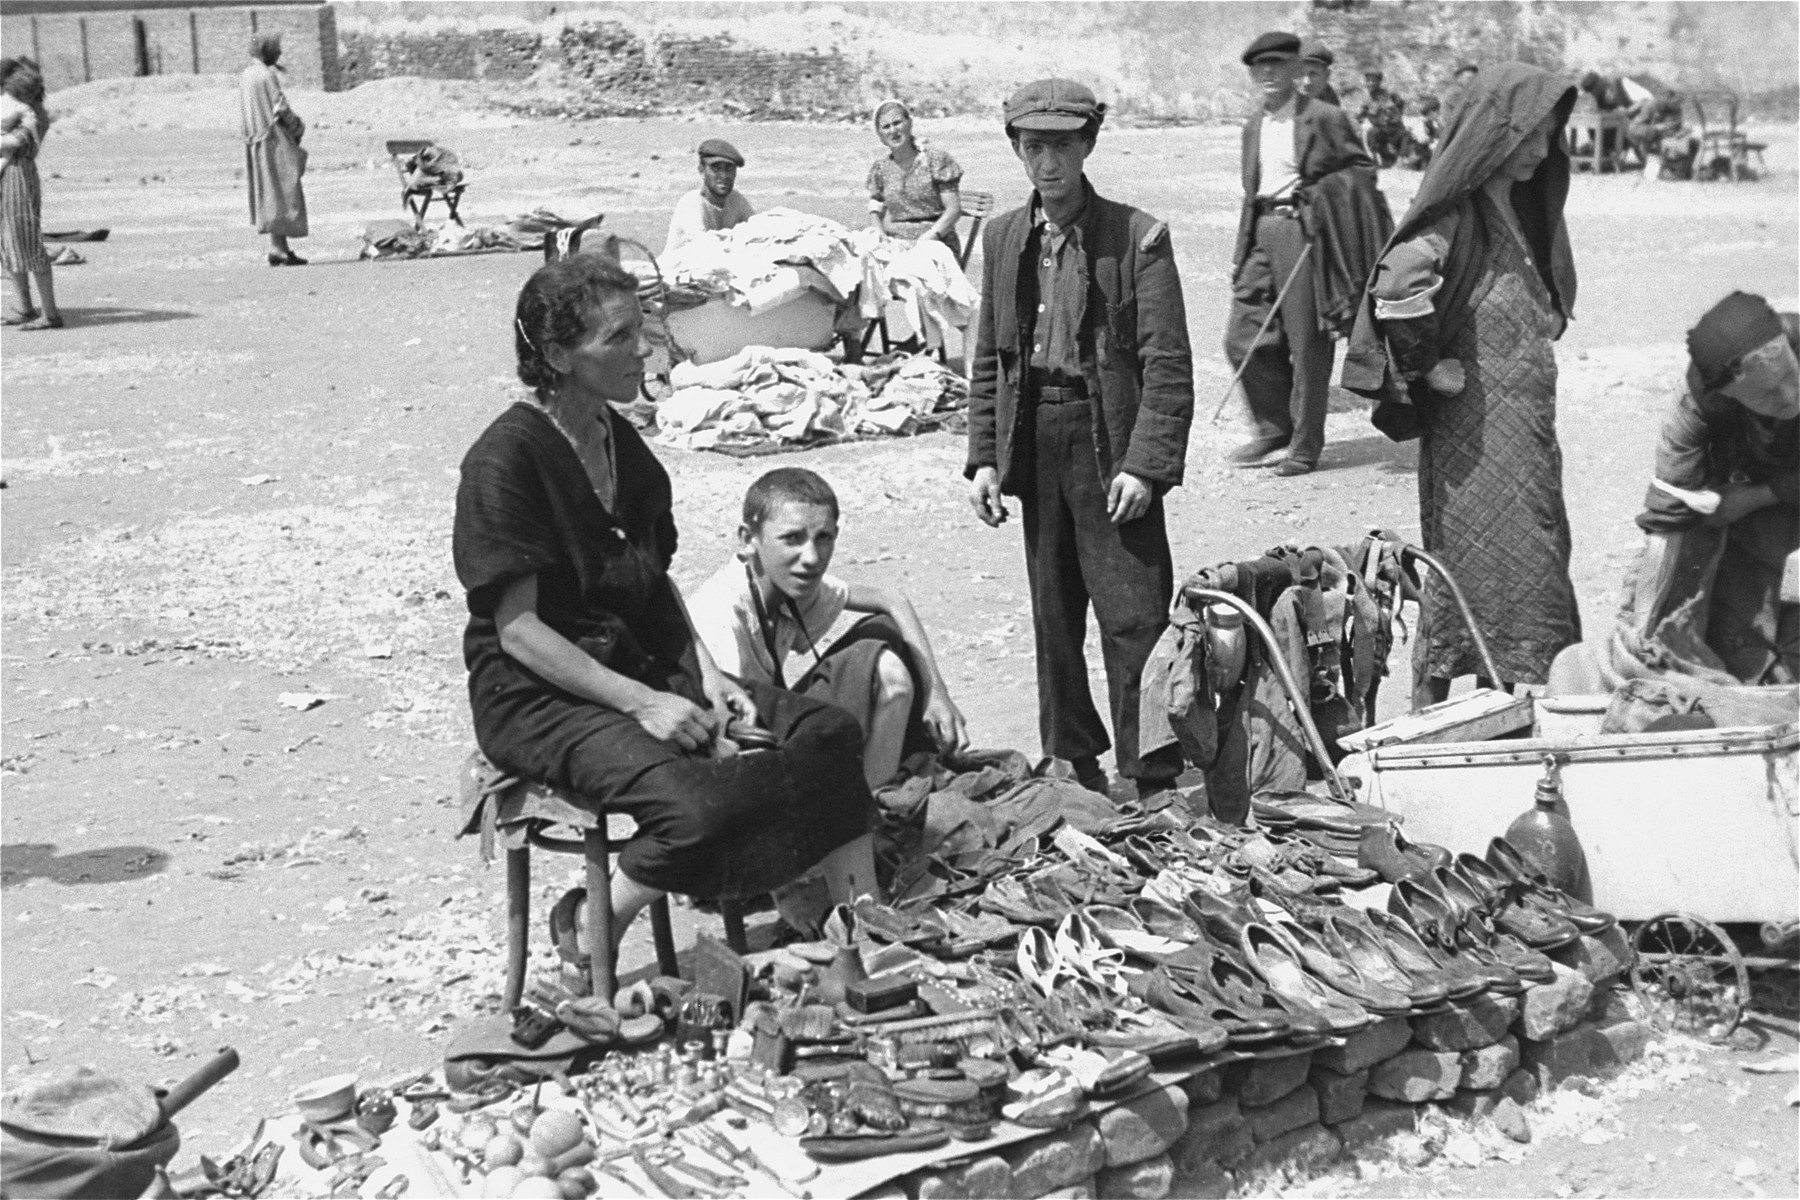 Vendors sell old shoes and other items of used clothing at an open air market in the Warsaw ghetto.